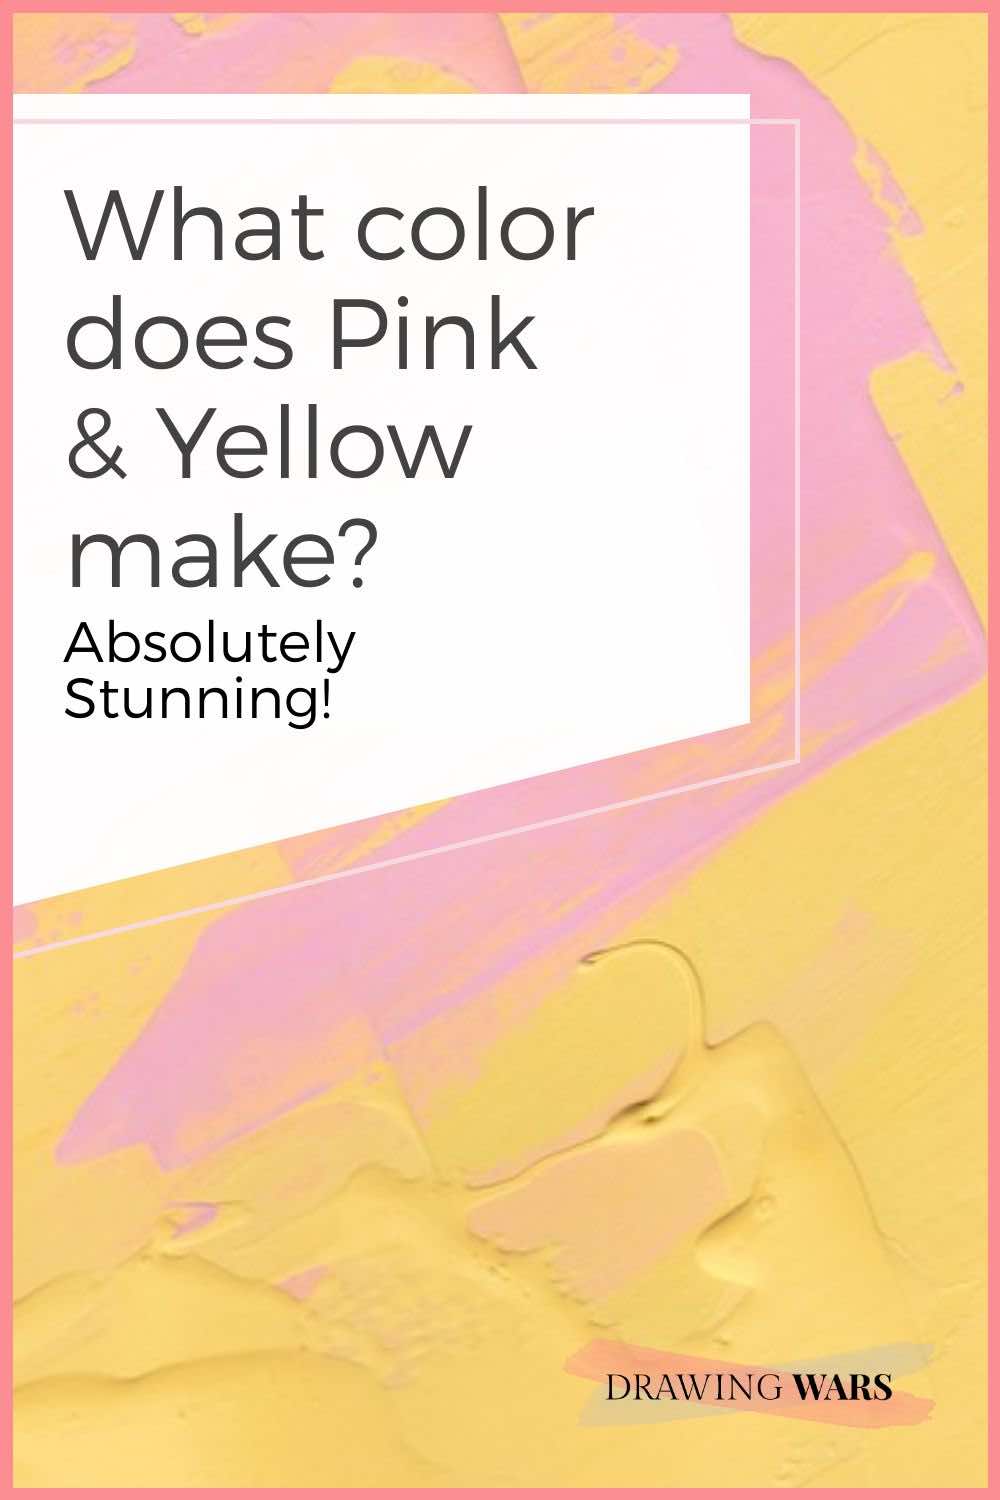 What color does Pink & Yellow make? Absolutely Stunning!